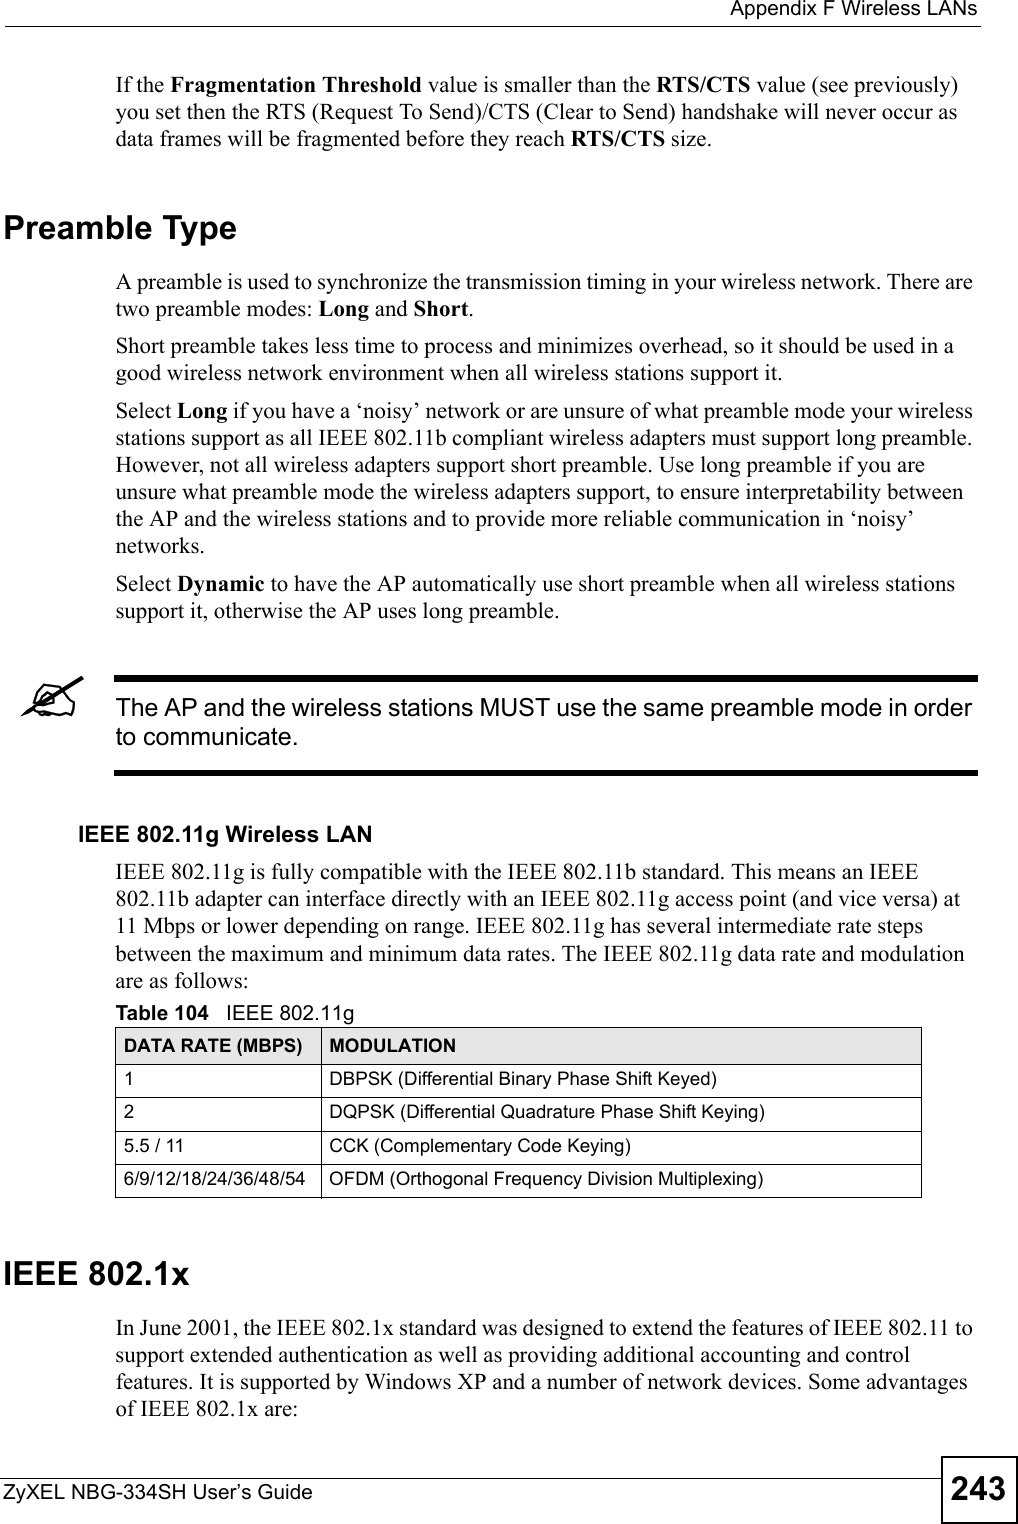  Appendix F Wireless LANsZyXEL NBG-334SH User’s Guide 243If the Fragmentation Threshold value is smaller than the RTS/CTS value (see previously) you set then the RTS (Request To Send)/CTS (Clear to Send) handshake will never occur as data frames will be fragmented before they reach RTS/CTS size.Preamble TypeA preamble is used to synchronize the transmission timing in your wireless network. There are two preamble modes: Long and Short. Short preamble takes less time to process and minimizes overhead, so it should be used in a good wireless network environment when all wireless stations support it. Select Long if you have a ‘noisy’ network or are unsure of what preamble mode your wireless stations support as all IEEE 802.11b compliant wireless adapters must support long preamble. However, not all wireless adapters support short preamble. Use long preamble if you are unsure what preamble mode the wireless adapters support, to ensure interpretability between the AP and the wireless stations and to provide more reliable communication in ‘noisy’ networks. Select Dynamic to have the AP automatically use short preamble when all wireless stations support it, otherwise the AP uses long preamble.&quot;The AP and the wireless stations MUST use the same preamble mode in order to communicate.IEEE 802.11g Wireless LANIEEE 802.11g is fully compatible with the IEEE 802.11b standard. This means an IEEE 802.11b adapter can interface directly with an IEEE 802.11g access point (and vice versa) at 11 Mbps or lower depending on range. IEEE 802.11g has several intermediate rate steps between the maximum and minimum data rates. The IEEE 802.11g data rate and modulation are as follows:IEEE 802.1xIn June 2001, the IEEE 802.1x standard was designed to extend the features of IEEE 802.11 to support extended authentication as well as providing additional accounting and control features. It is supported by Windows XP and a number of network devices. Some advantages of IEEE 802.1x are:Table 104   IEEE 802.11gDATA RATE (MBPS) MODULATION1 DBPSK (Differential Binary Phase Shift Keyed)2 DQPSK (Differential Quadrature Phase Shift Keying)5.5 / 11 CCK (Complementary Code Keying) 6/9/12/18/24/36/48/54 OFDM (Orthogonal Frequency Division Multiplexing) 